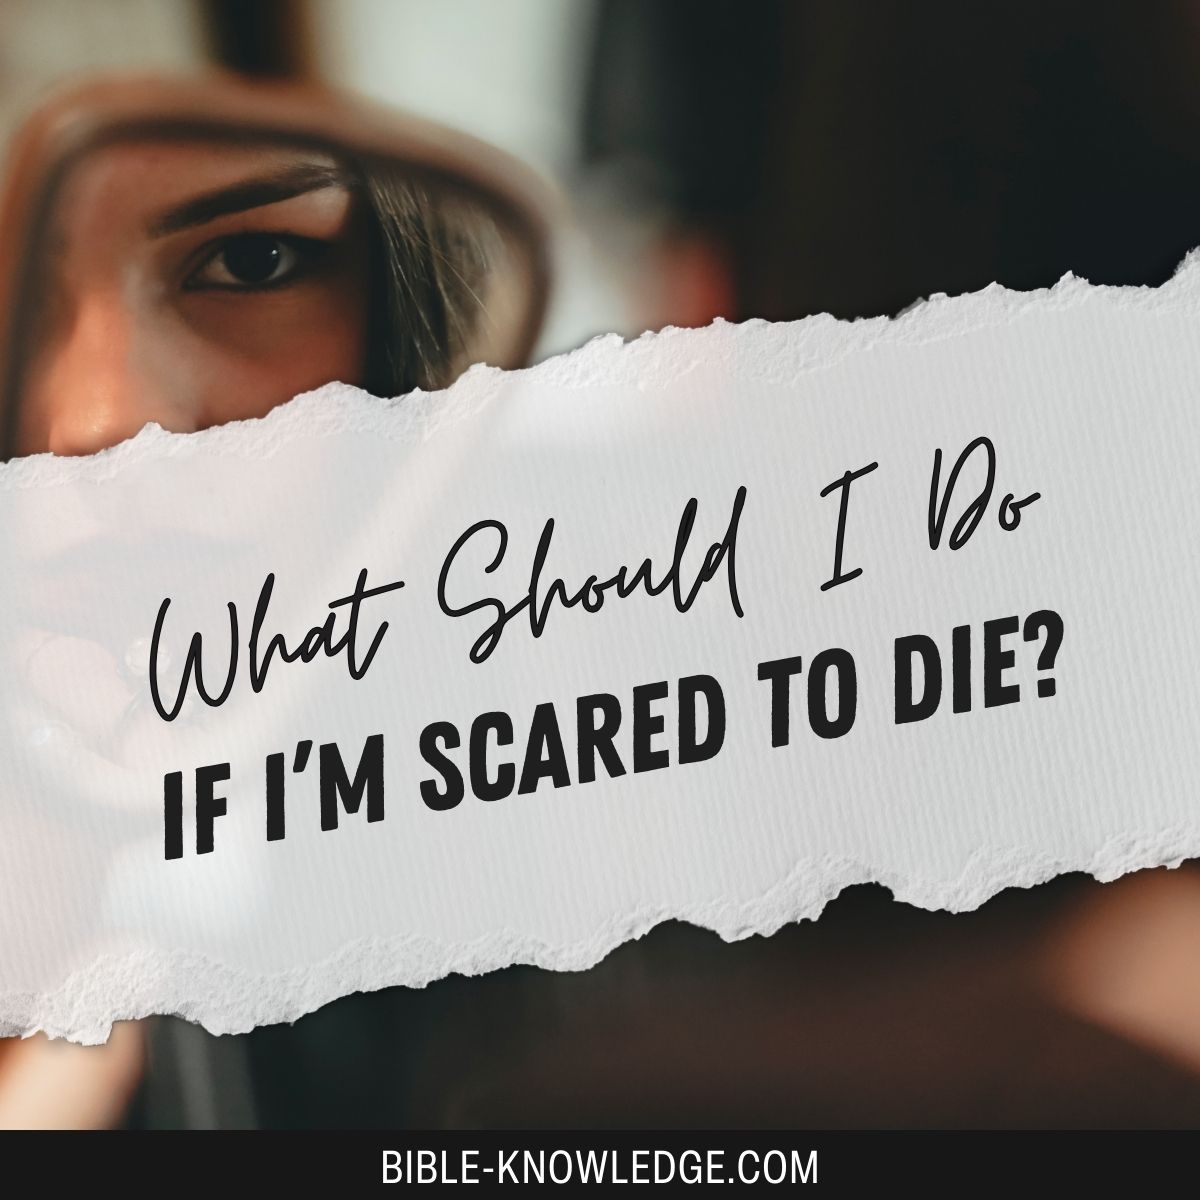 What Should I Do if I’m Scared to Die?